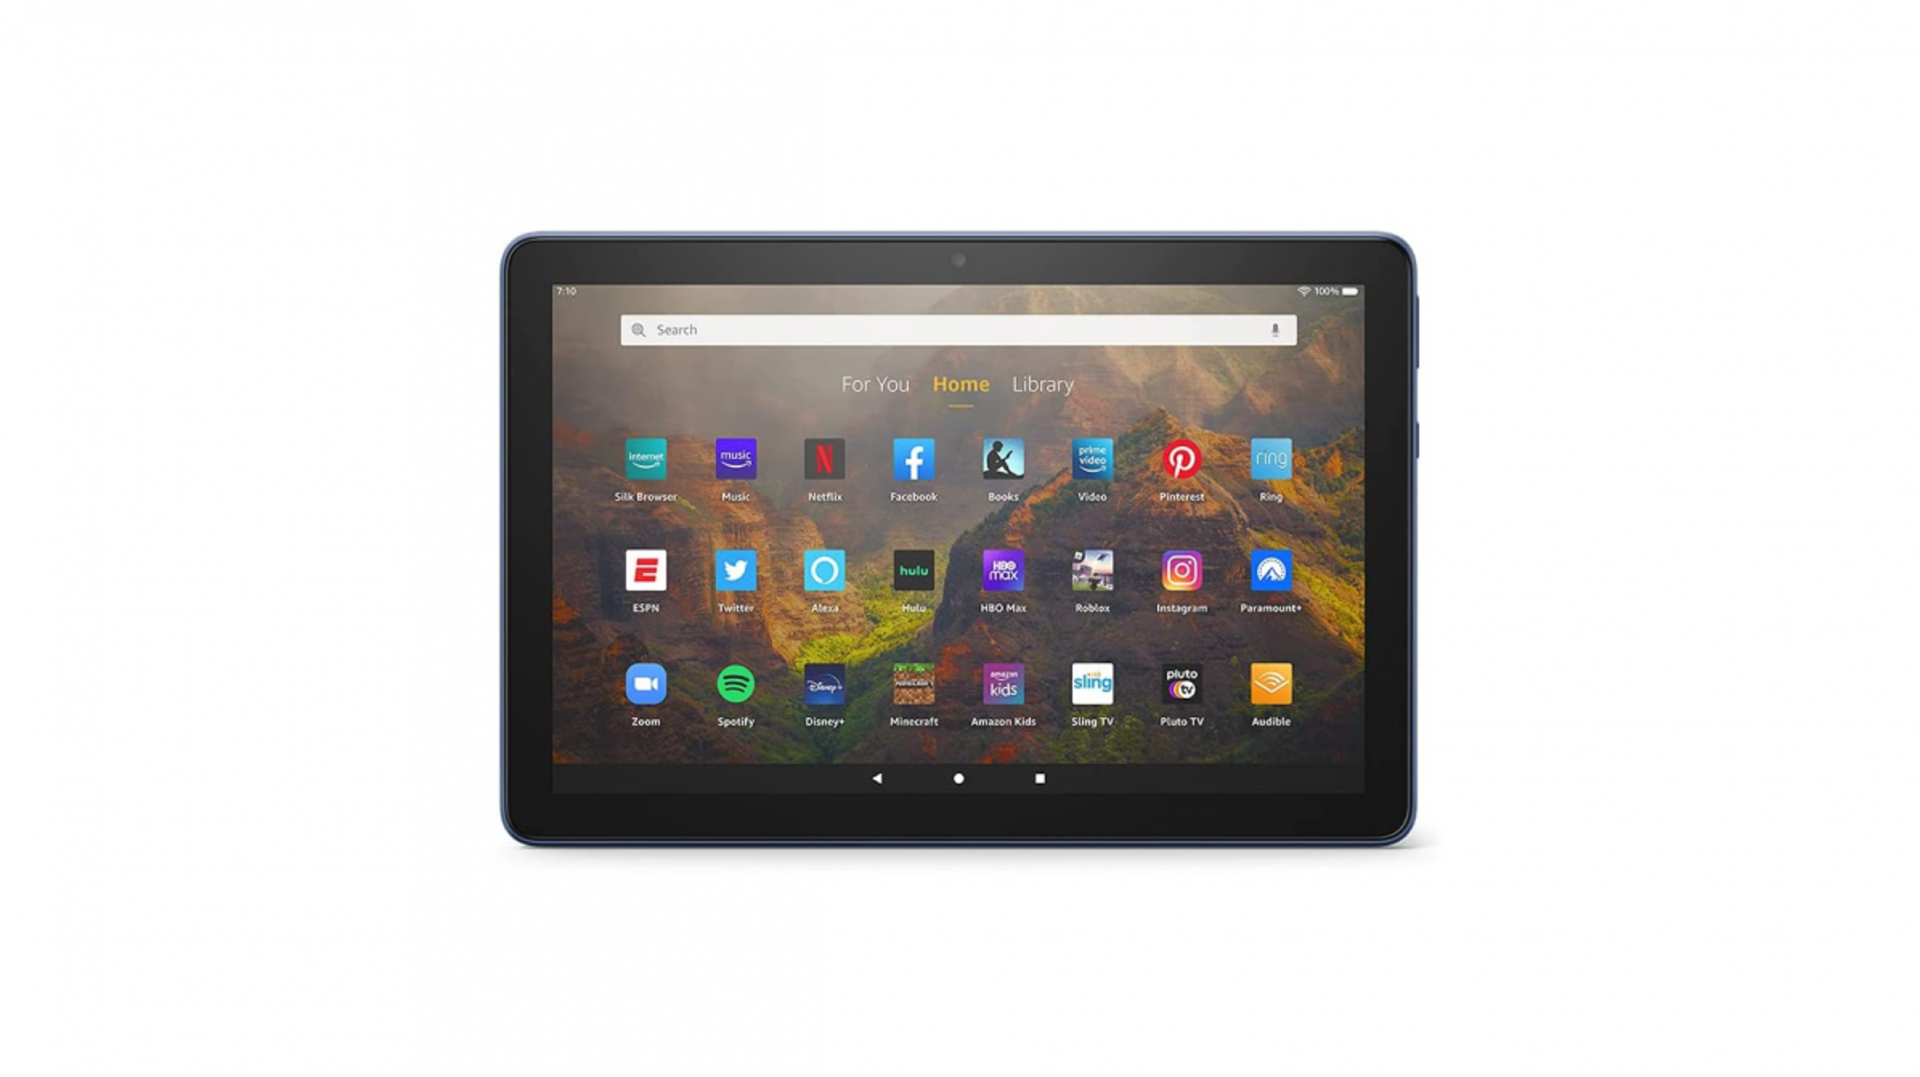 Download Apps on an Amazon Fire Tablet